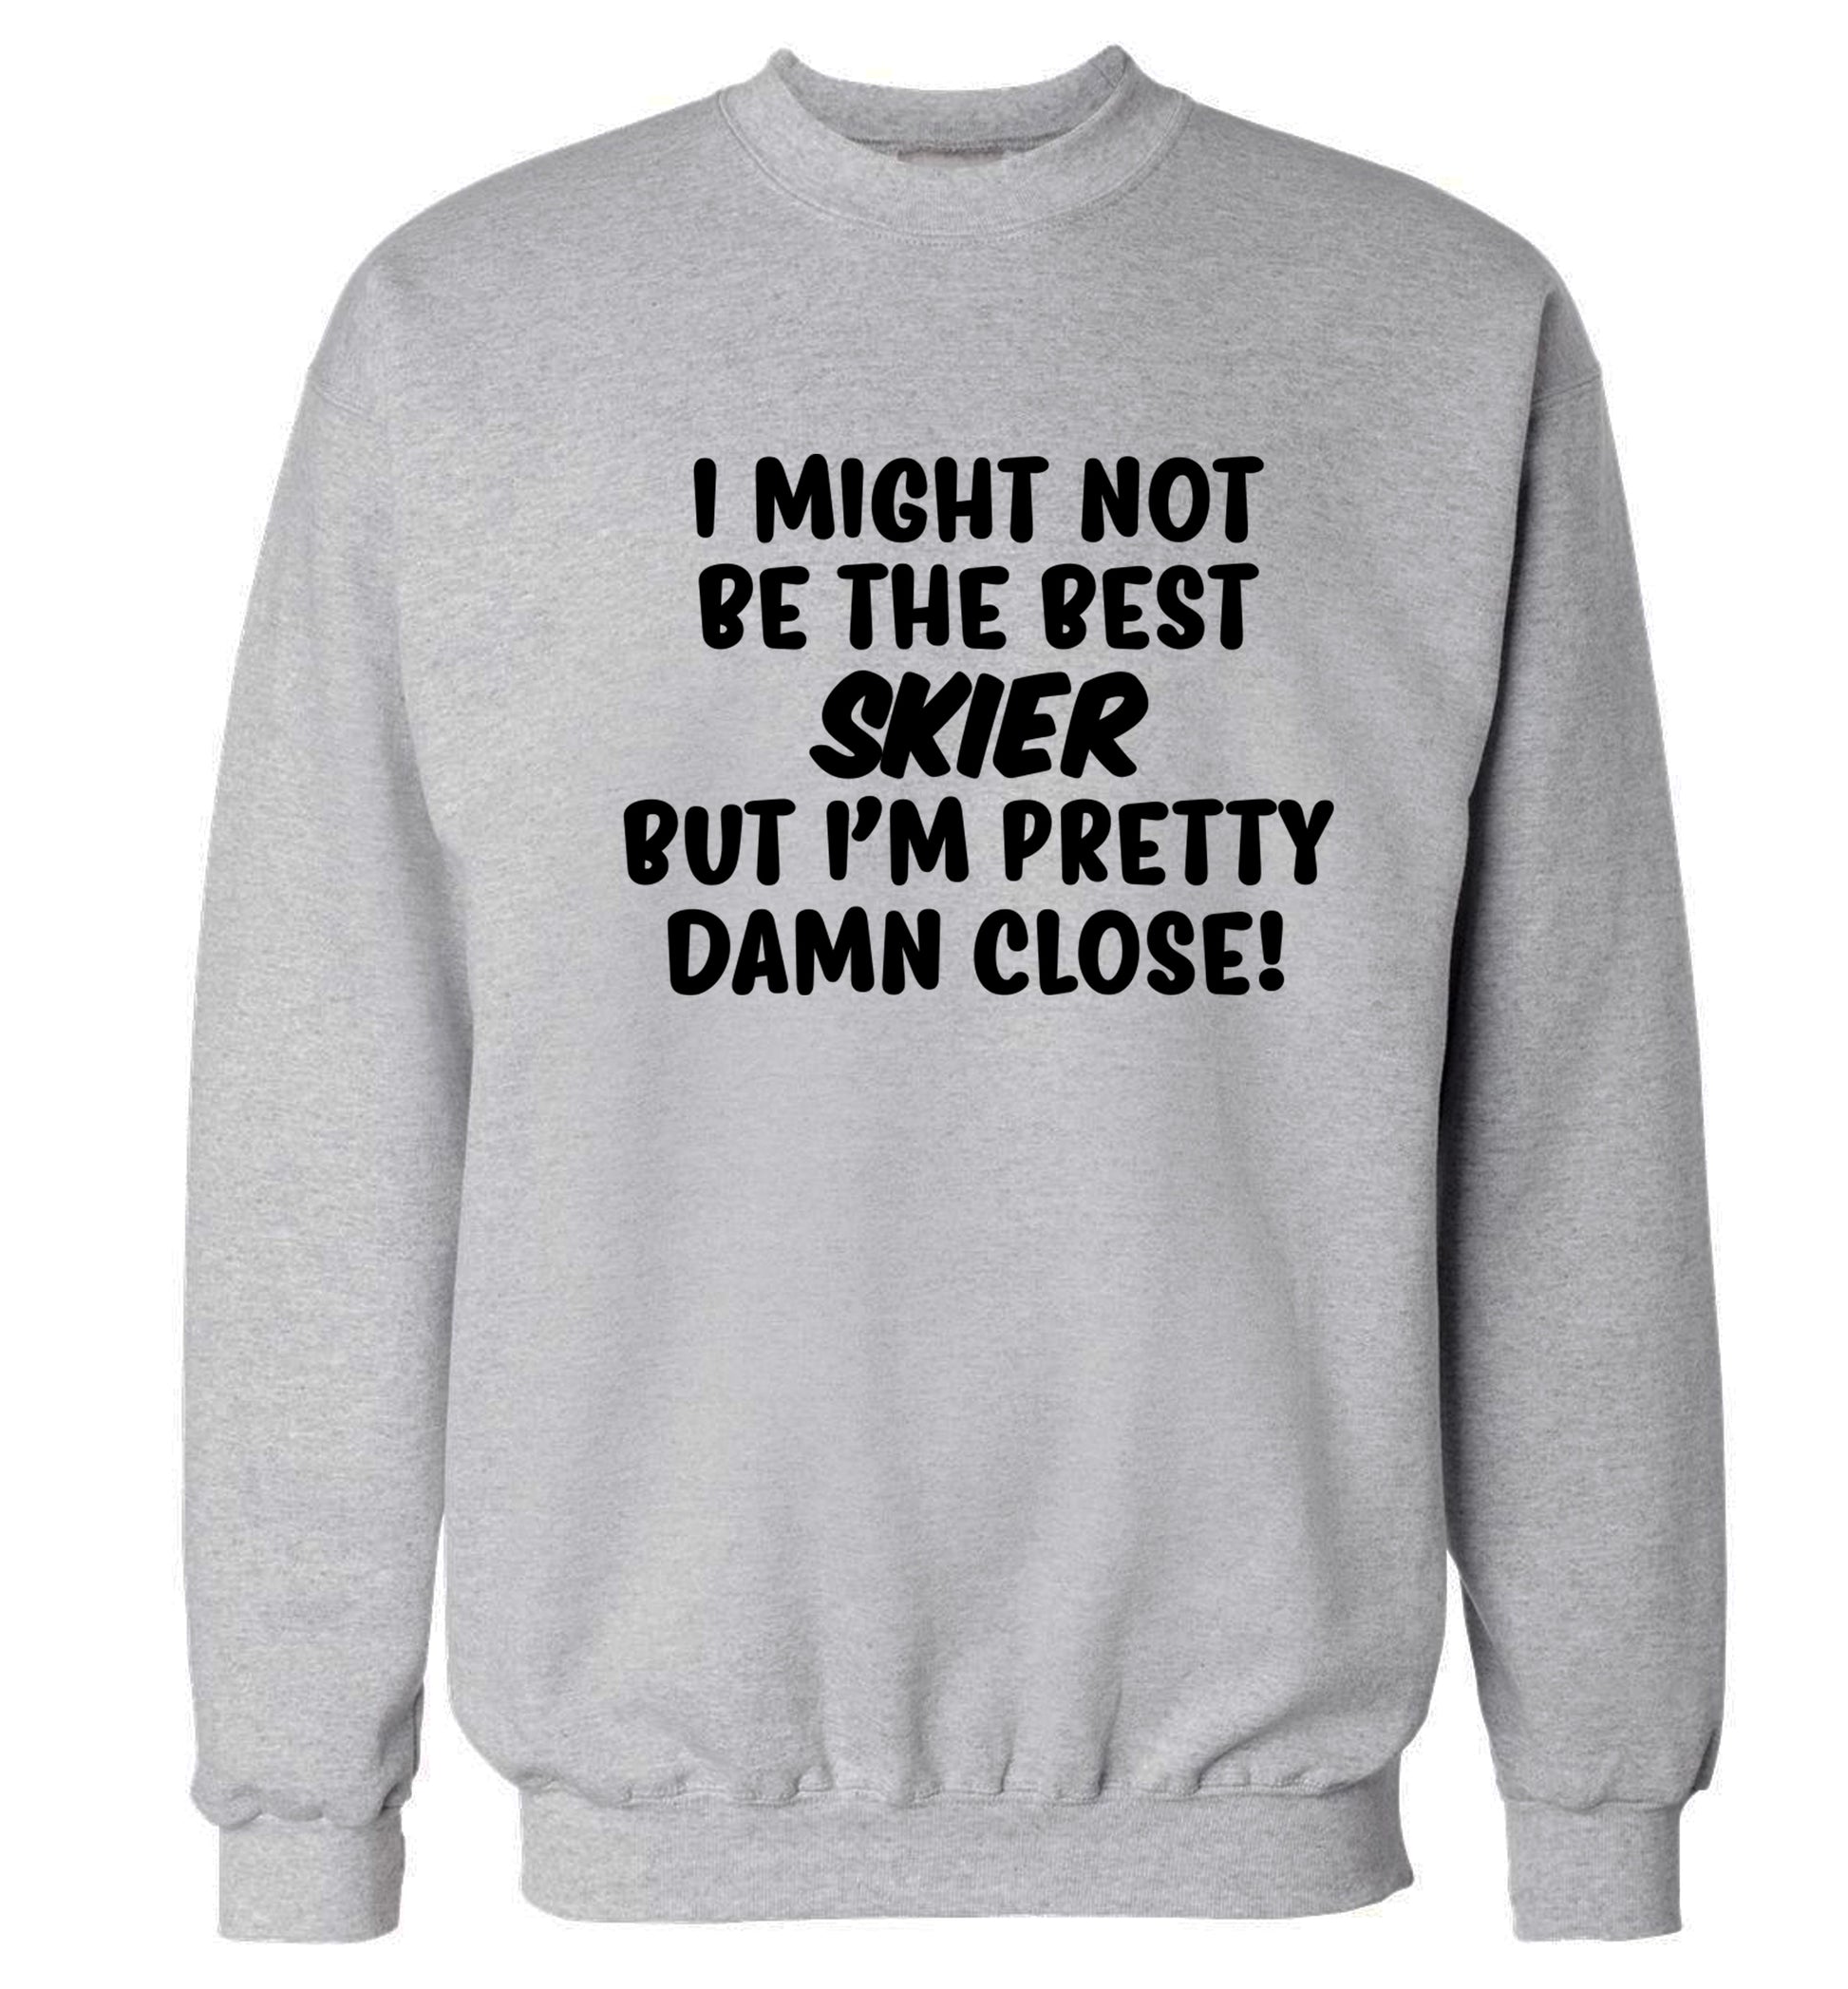 I might not be the best skier but I'm pretty damn close! Adult's unisexgrey Sweater 2XL